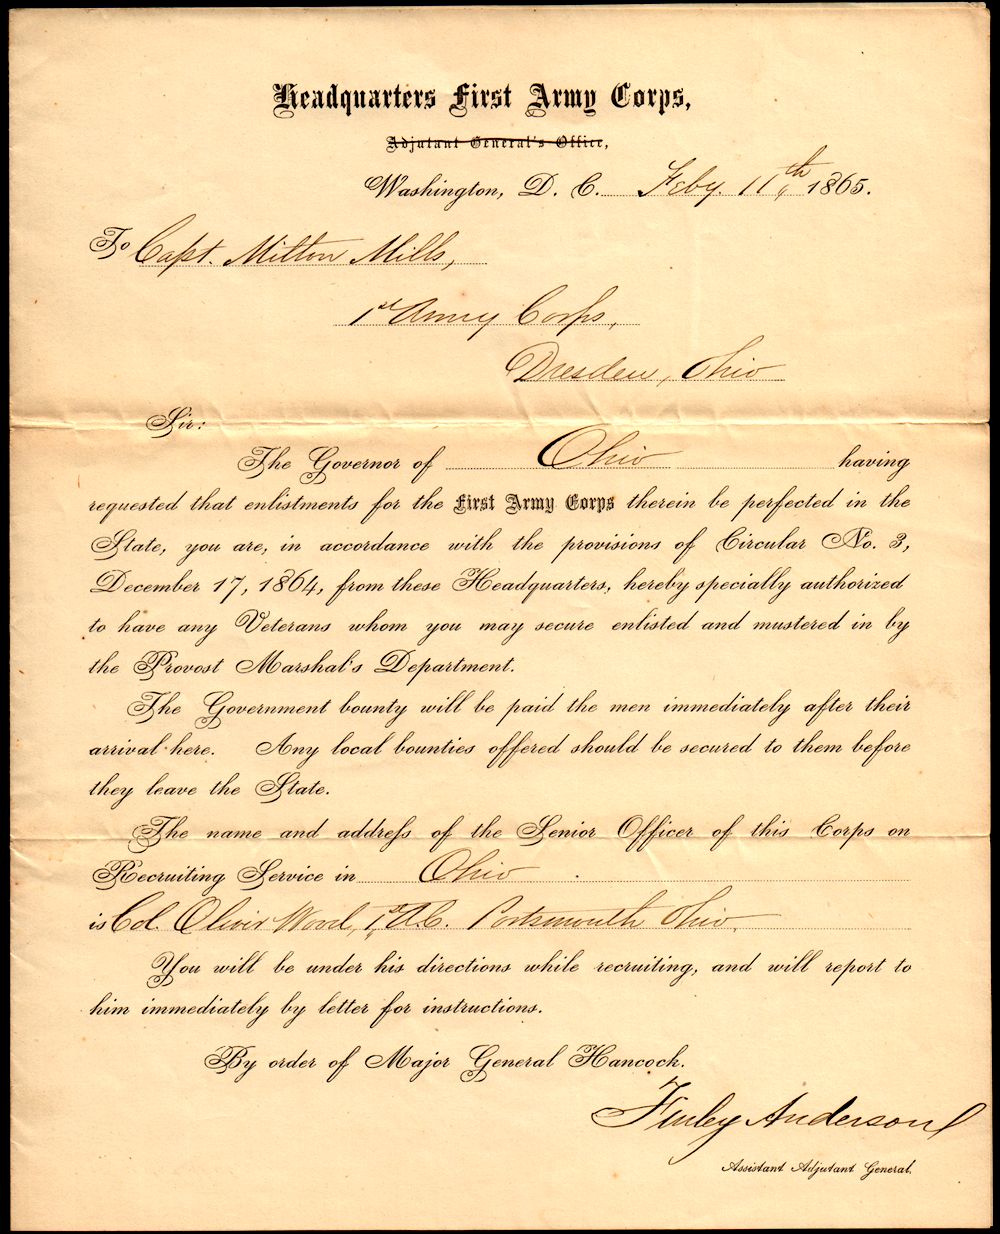 Mills' Orders from First Army Corps